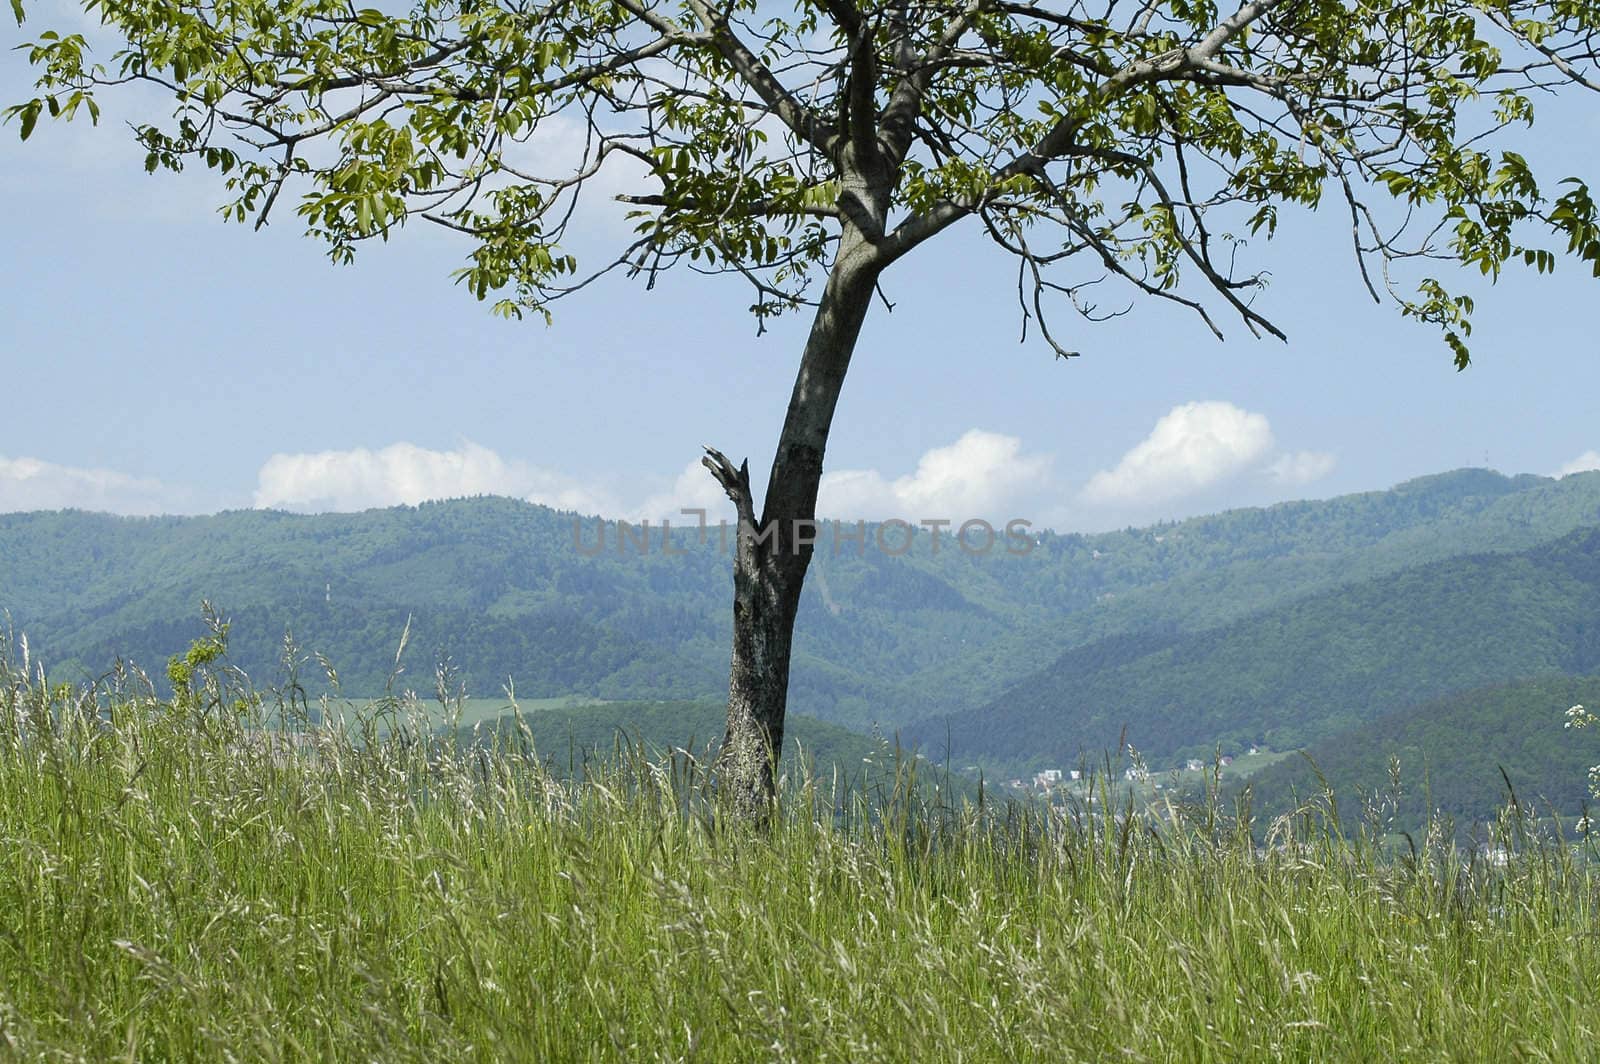 solitary tree on a hill, green grass, blue hills and sky